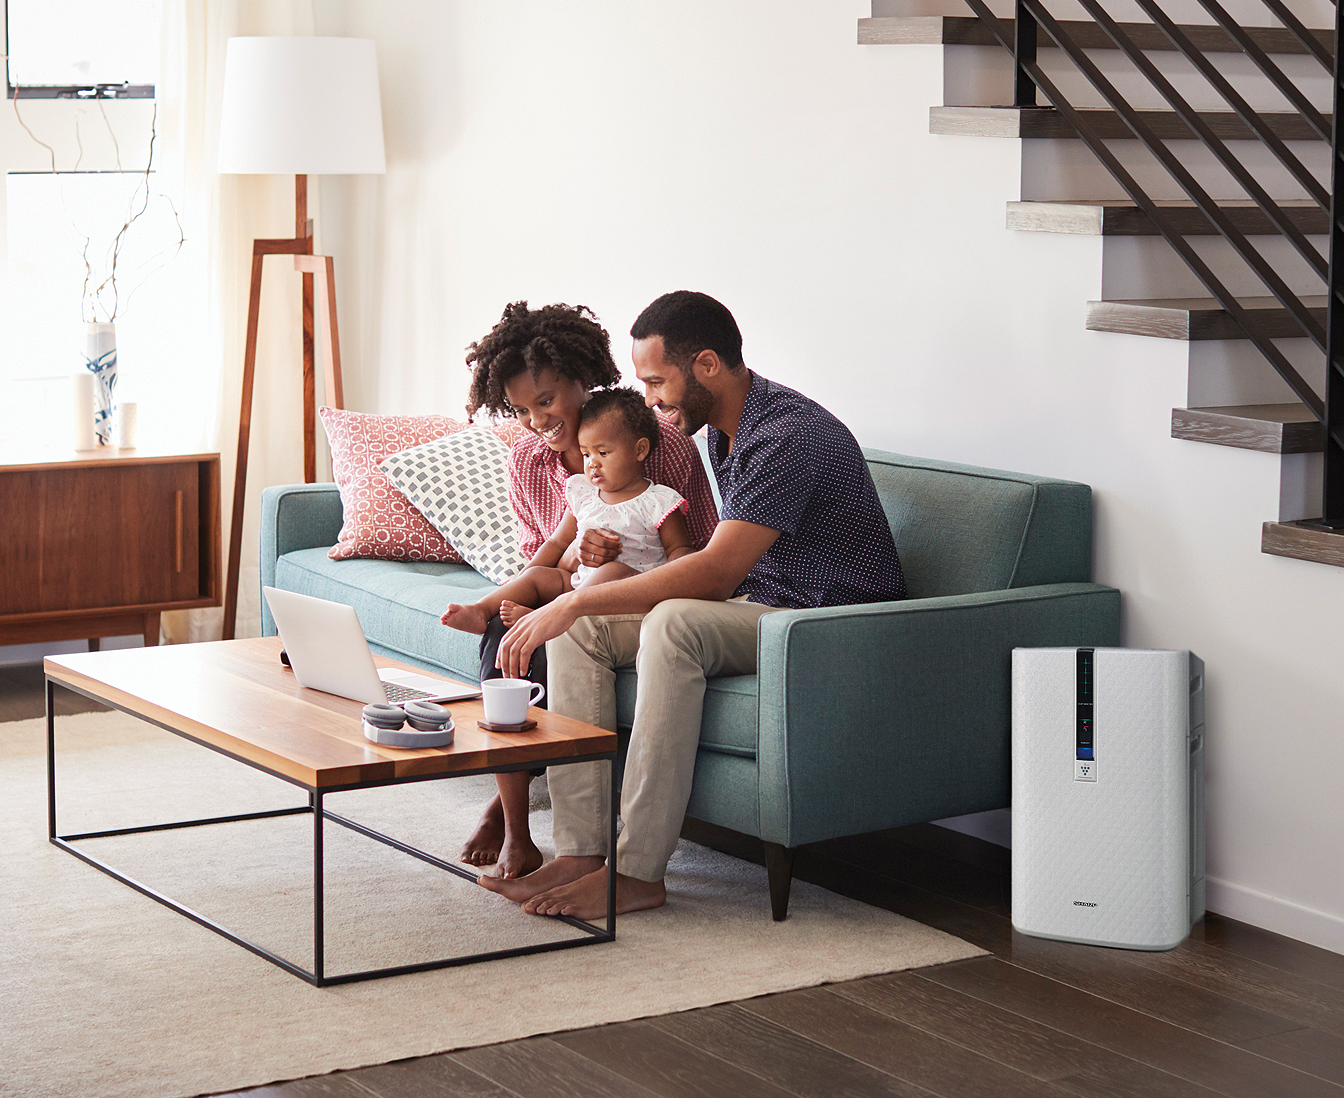 Family in living room with KC850U air purifier